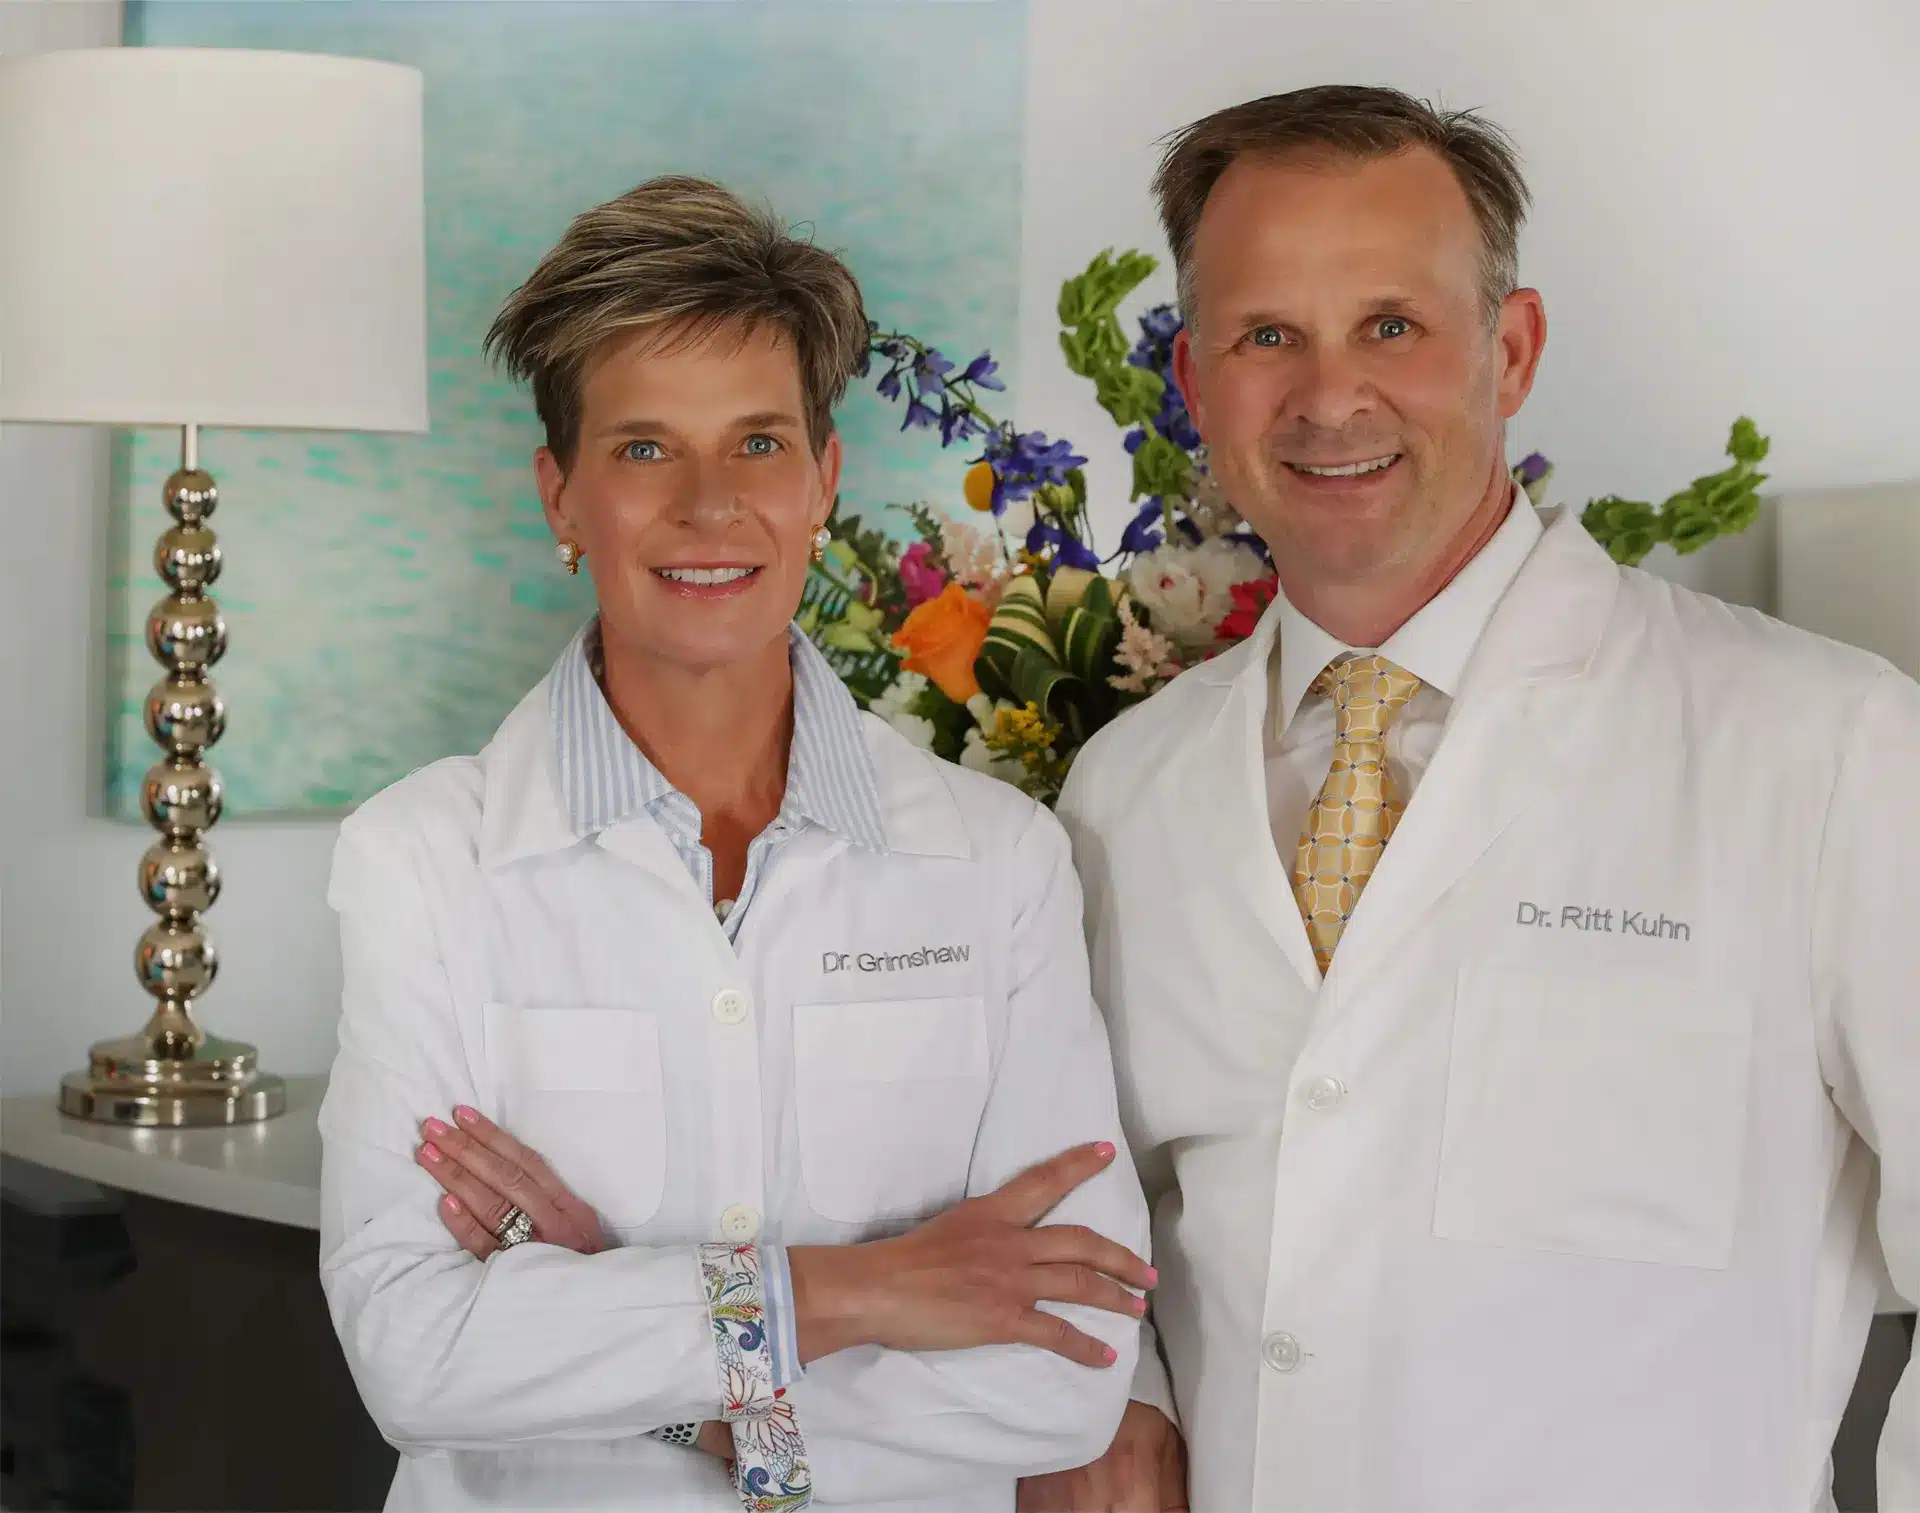 Dr. Grimshaw and Dr. Kuhn, Aberdeen Cosmetic Dentists